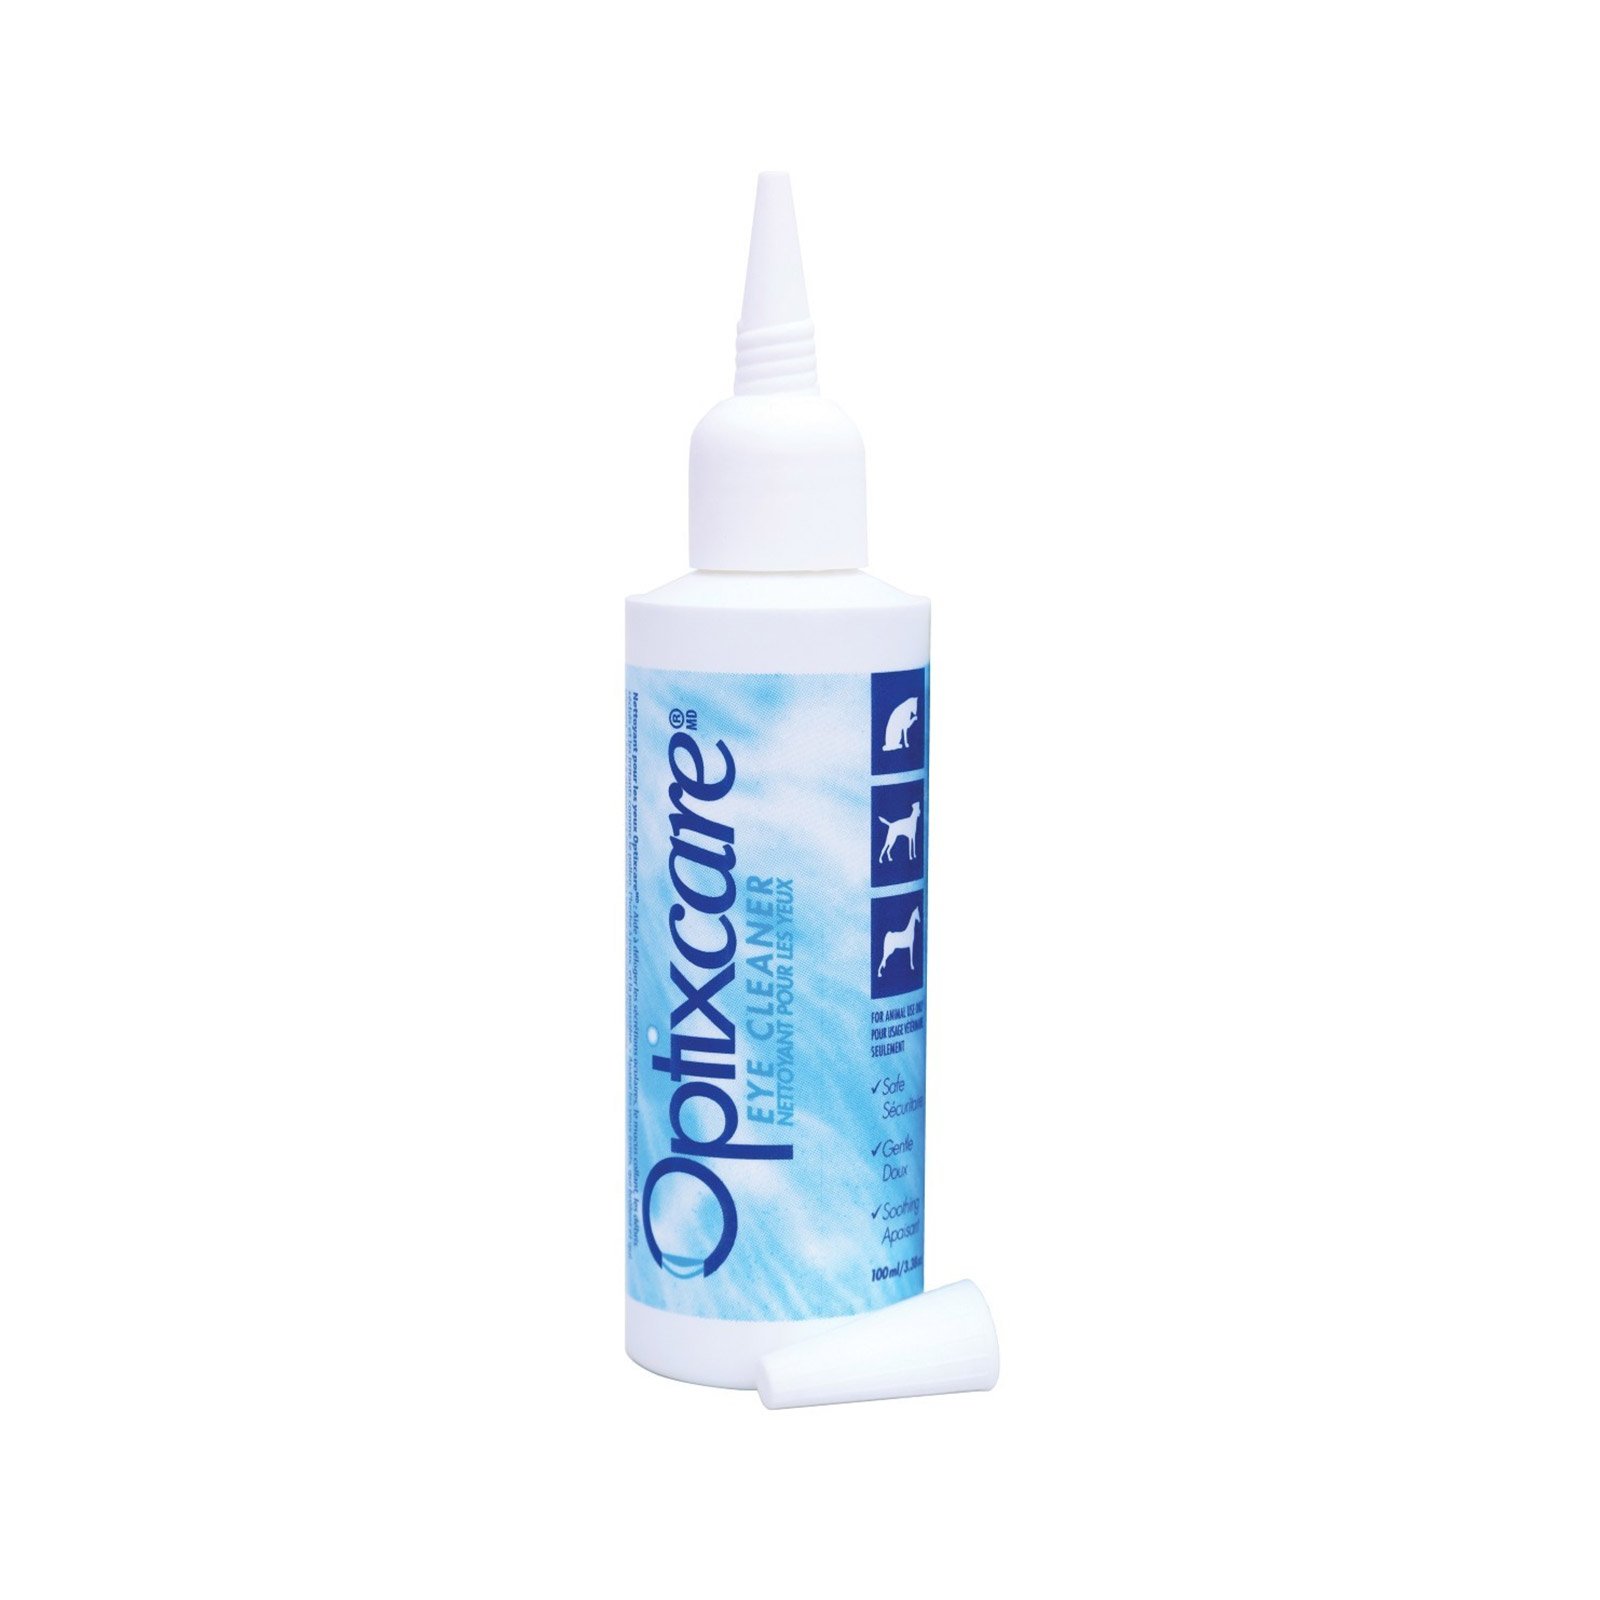 Optixcare Dog & Cat Eye Cleaner for Dogs & Cats